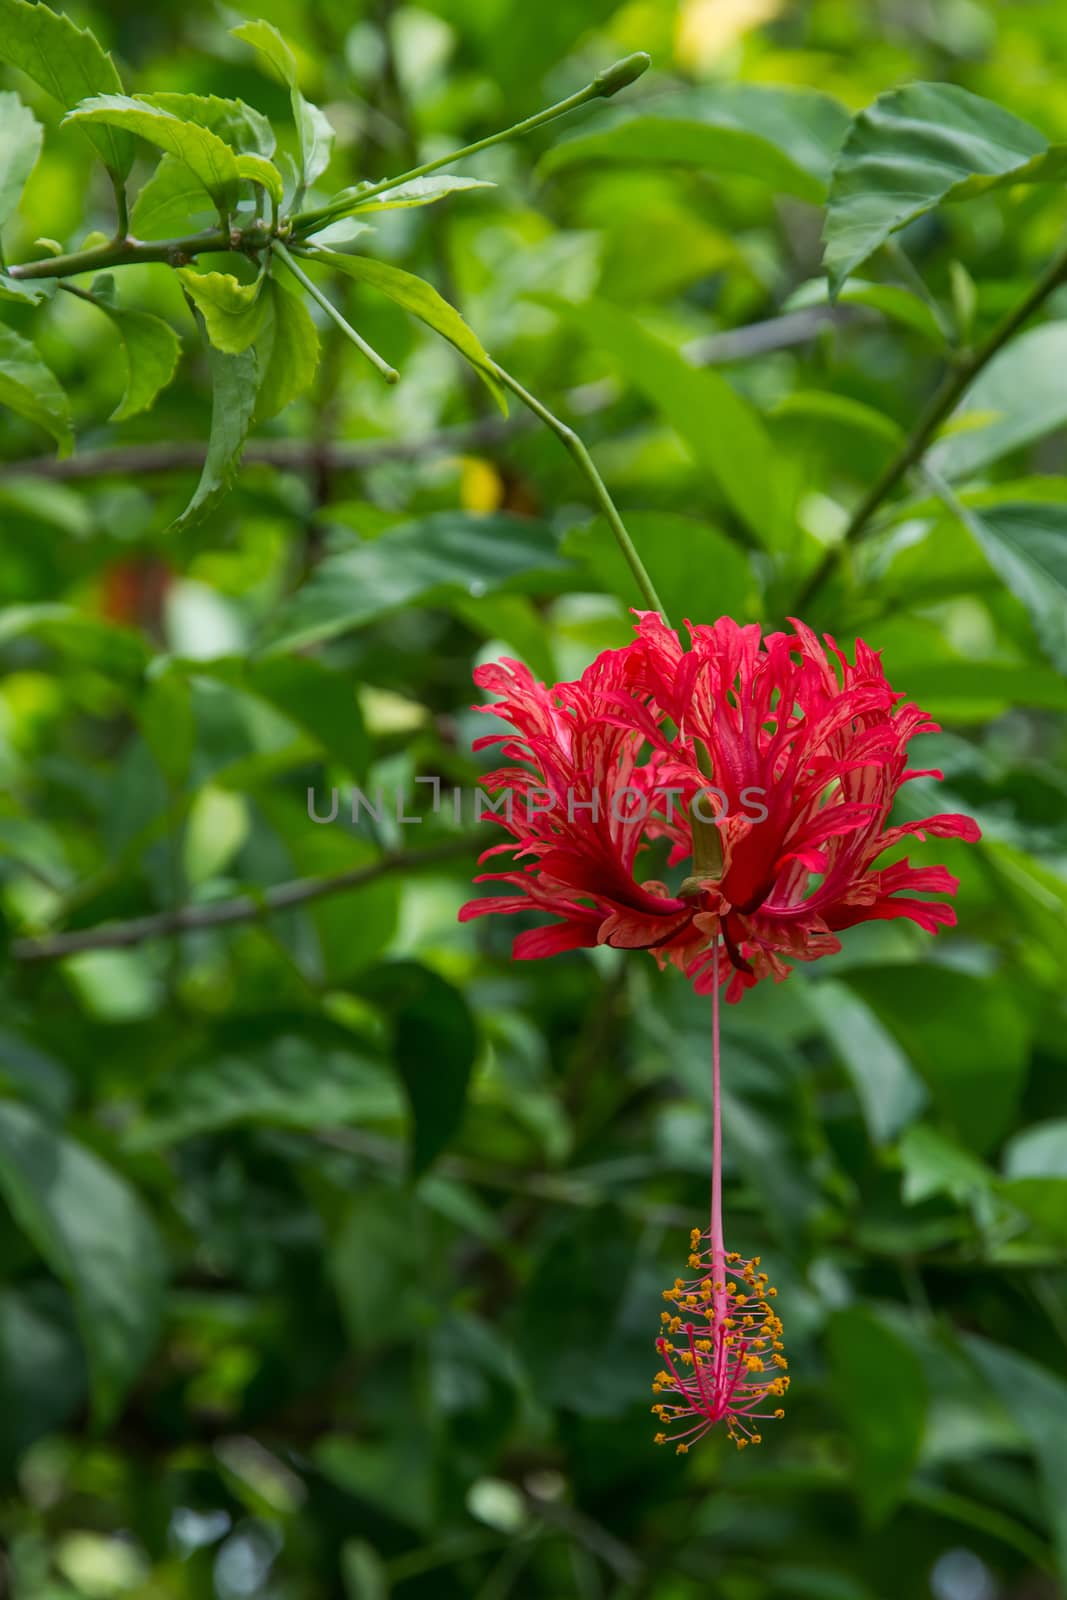 Red tropical flower. Red Hibiscus type flower (Hibiscus sinensis) with large pistils and fringed petals on green foliage.